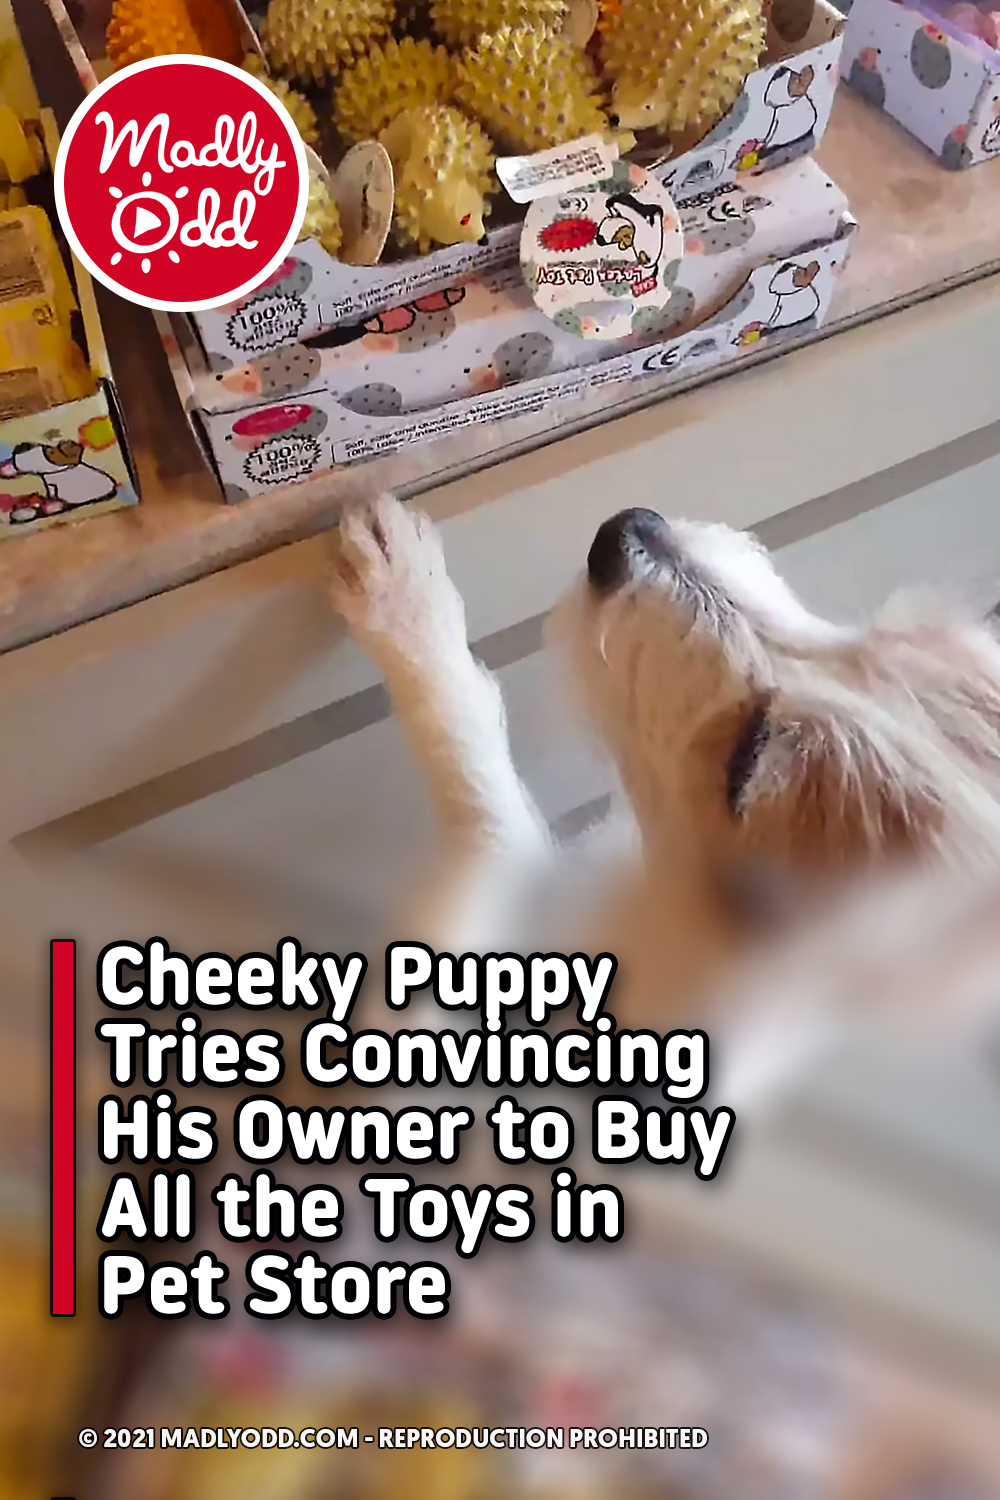 Cheeky Puppy Tries Convincing His Owner to Buy All the Toys in Pet Store